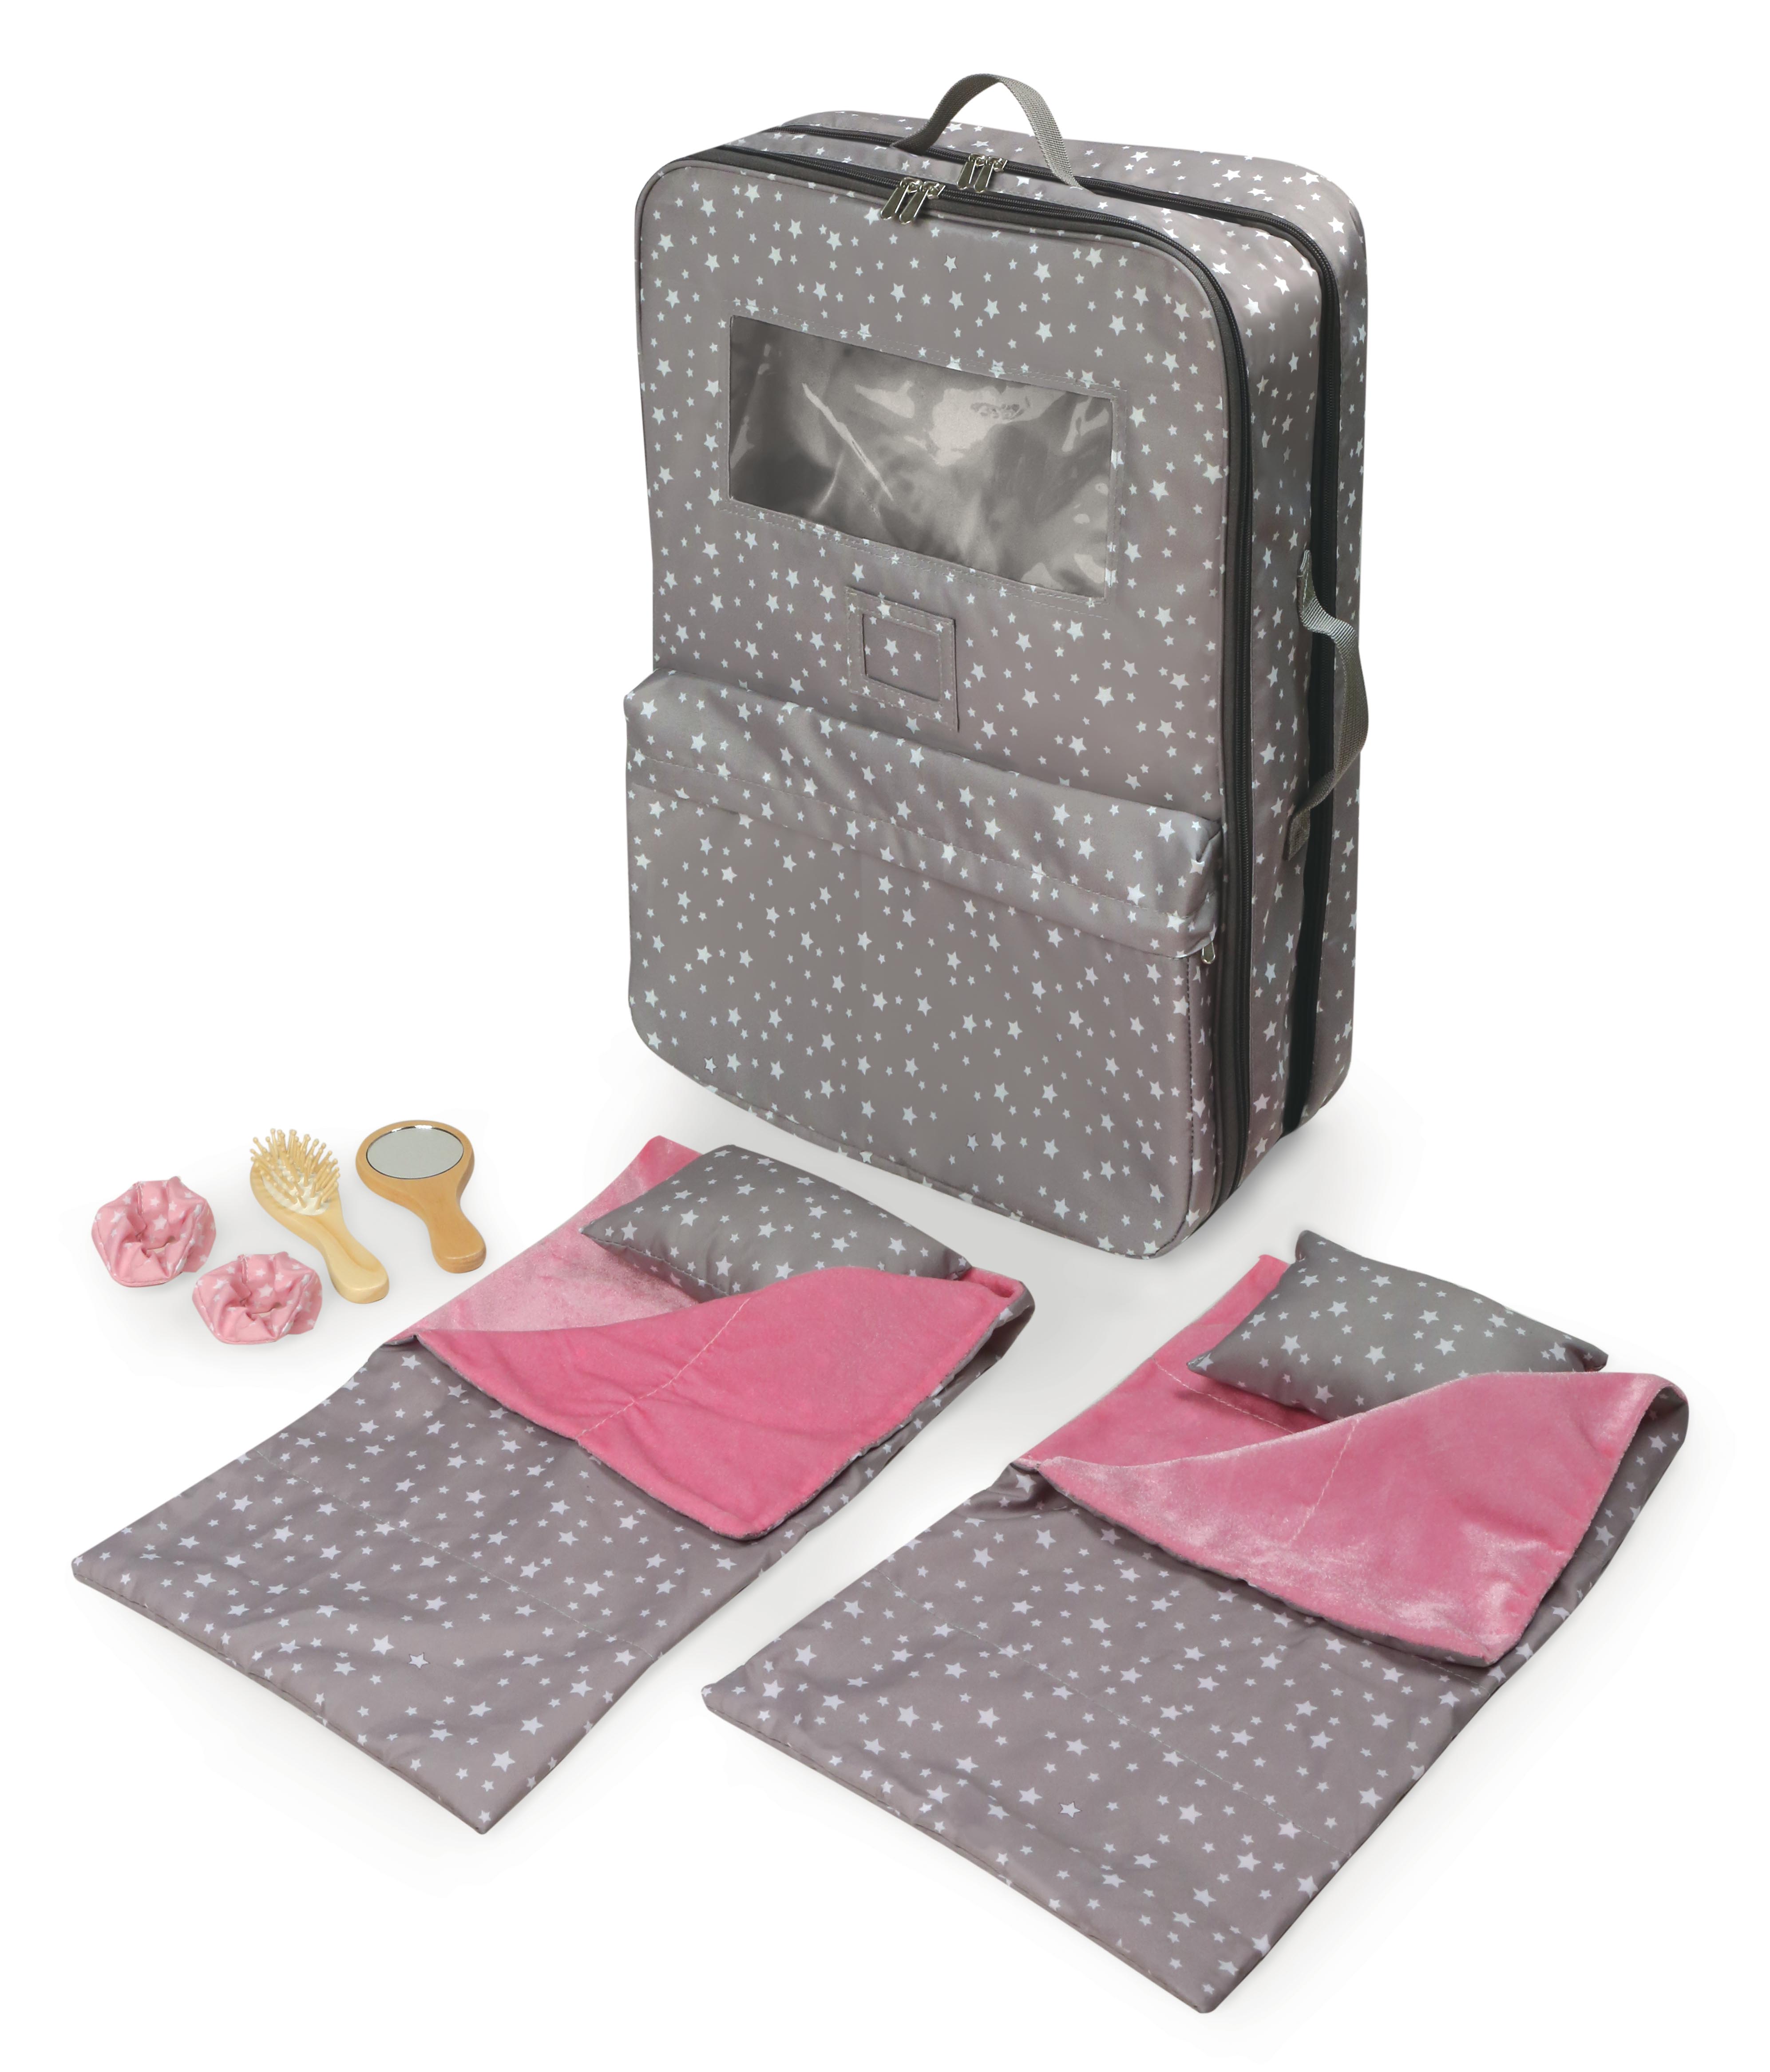 Pack Pretty Double Doll Carrier with 2 Sleeping Bags for 18-inch Dolls -Gray/Stars